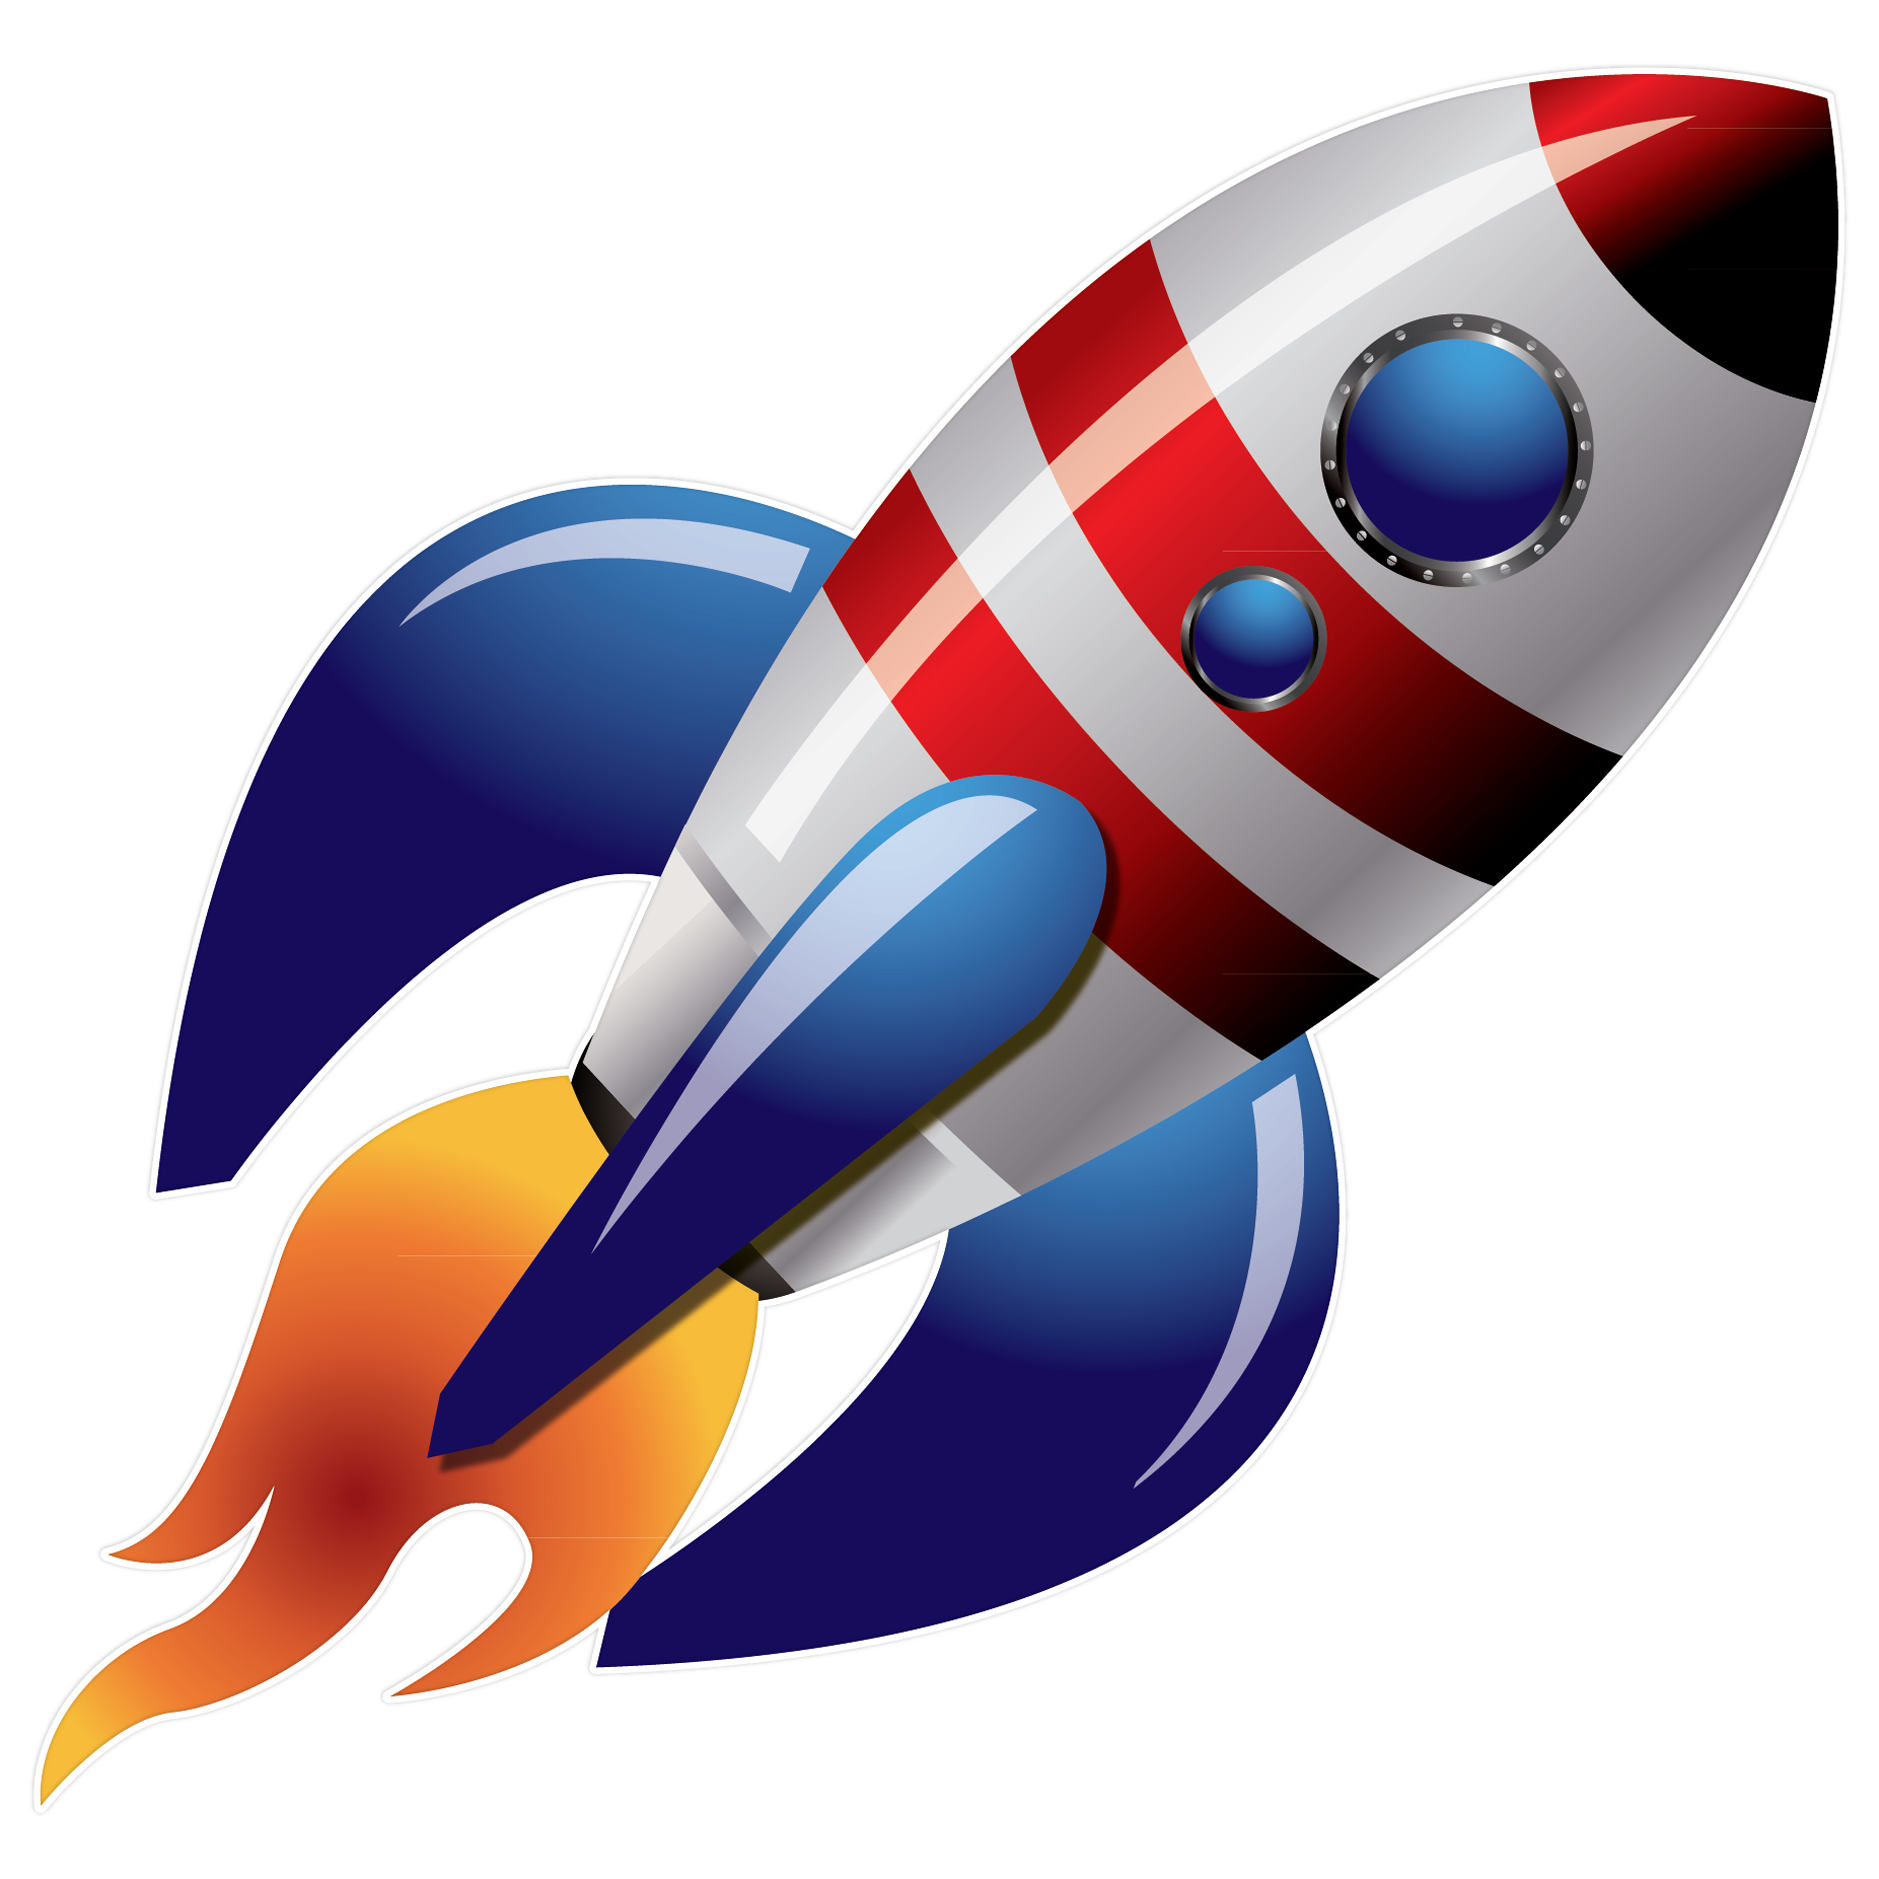 Rocket ship png #30473 - Free Icons and PNG Backgrounds